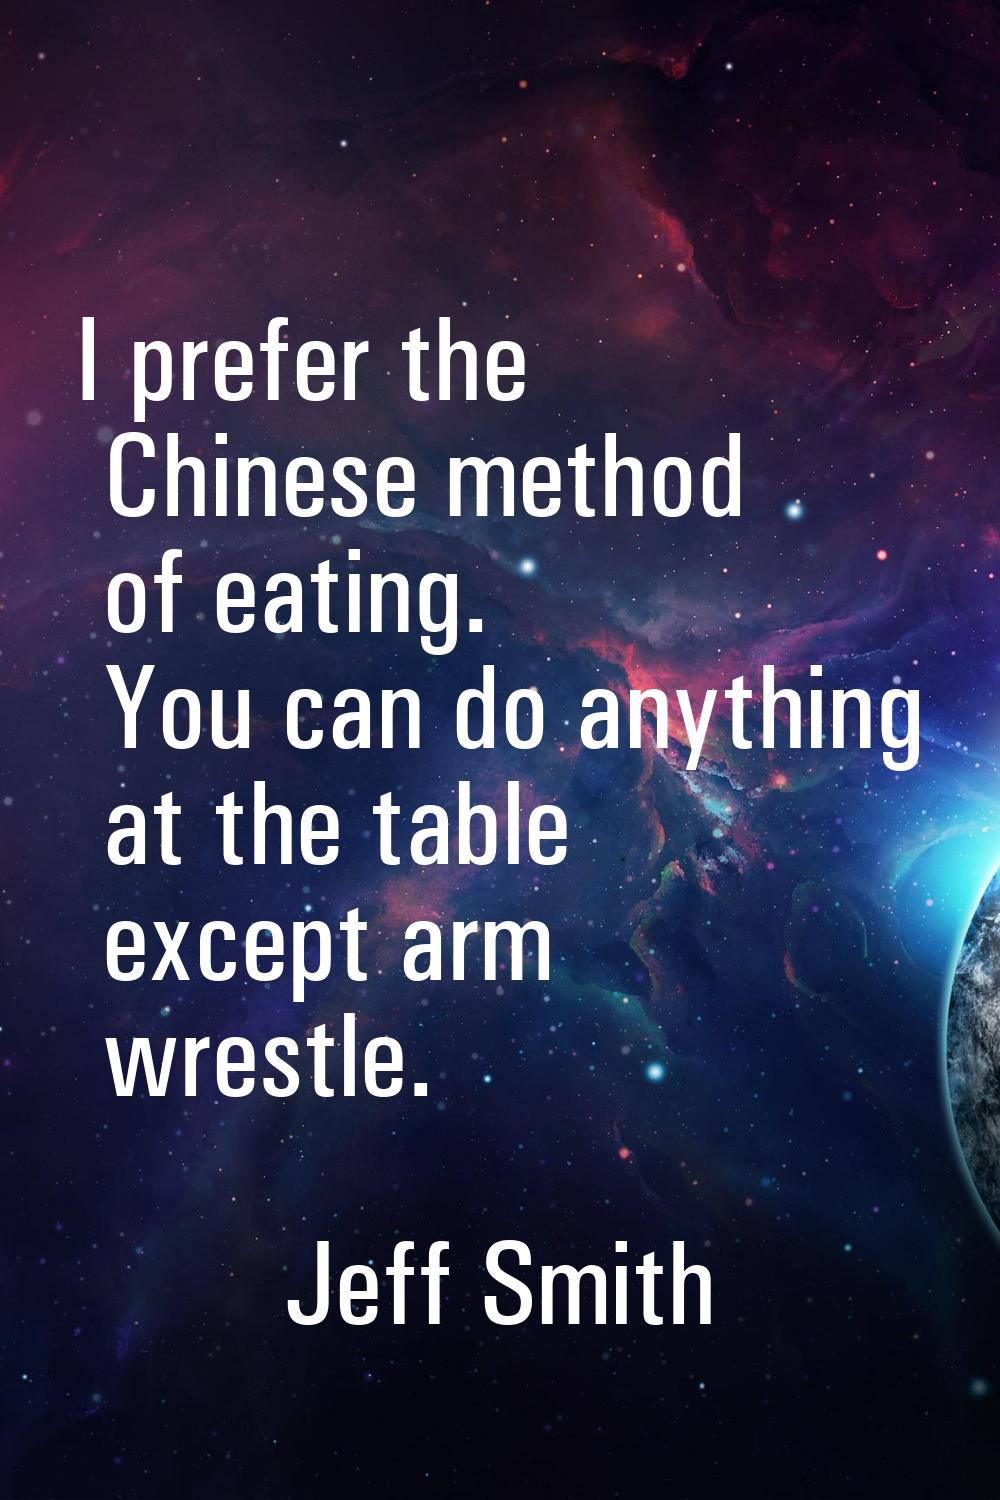 I prefer the Chinese method of eating. You can do anything at the table except arm wrestle.